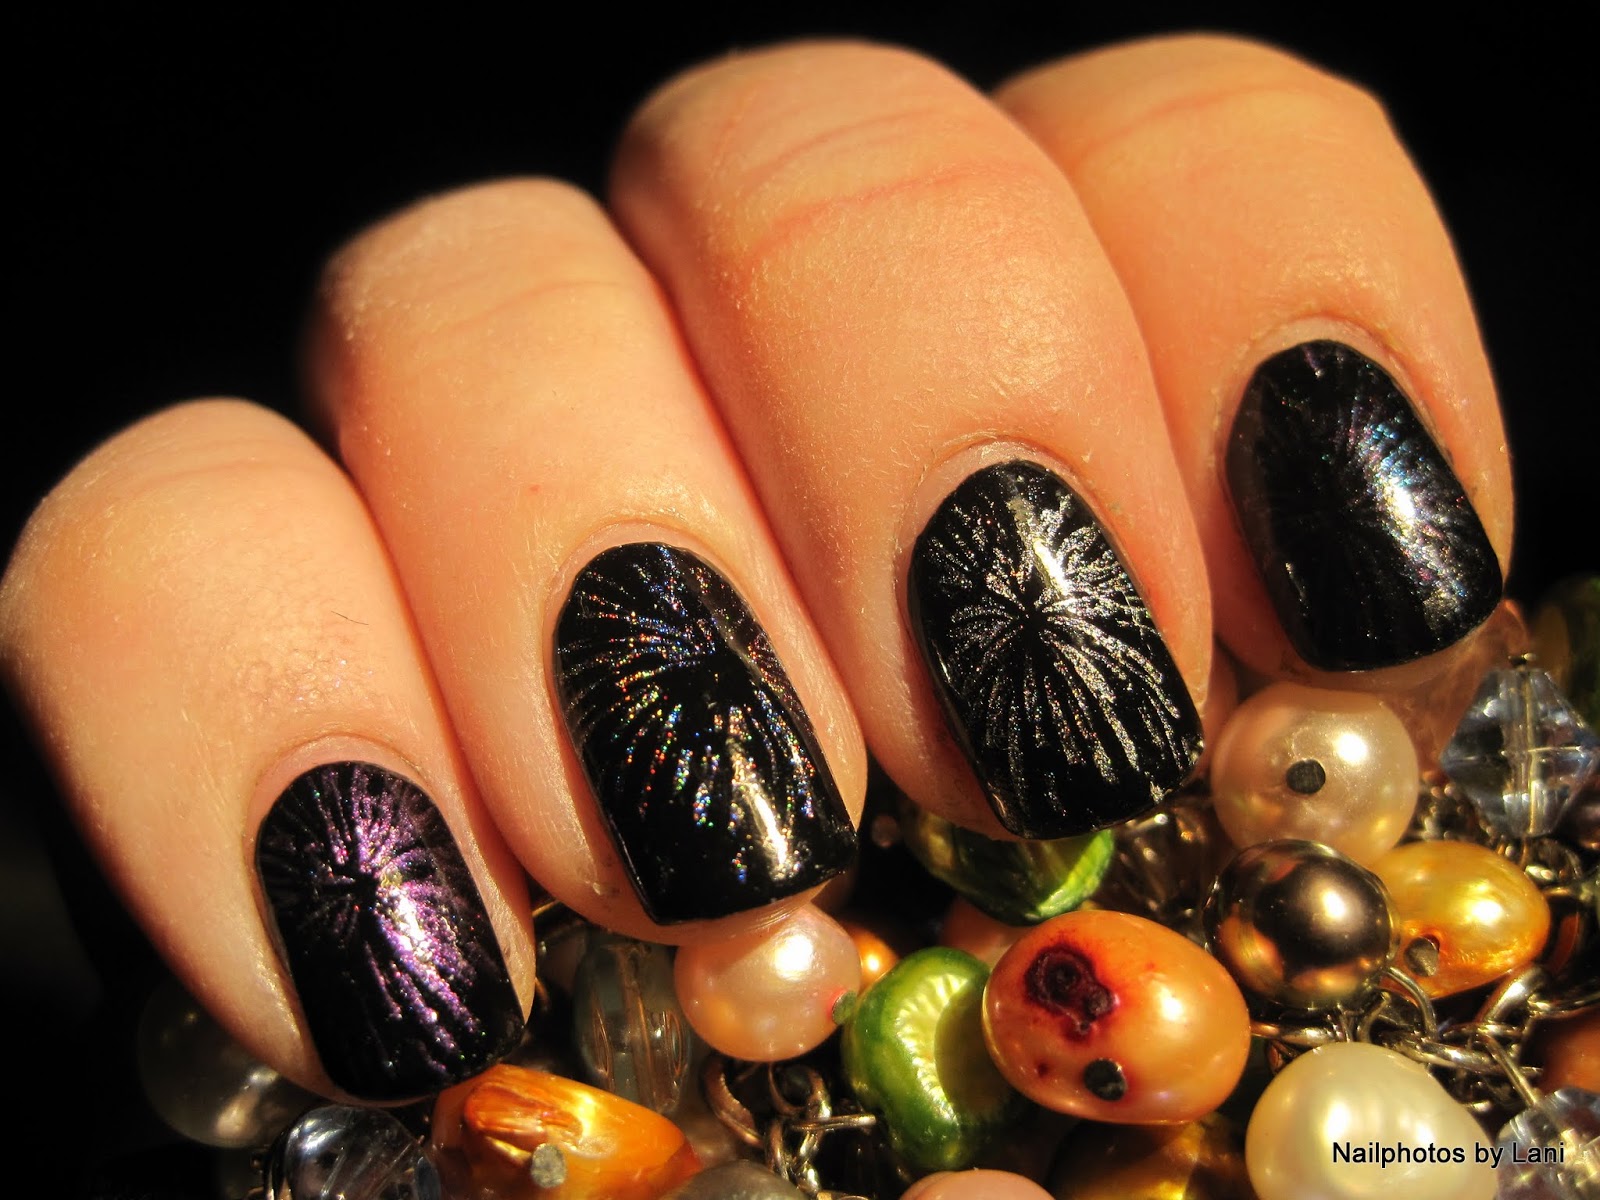 6. "2024 New Year's Nail Art Inspiration" - wide 7